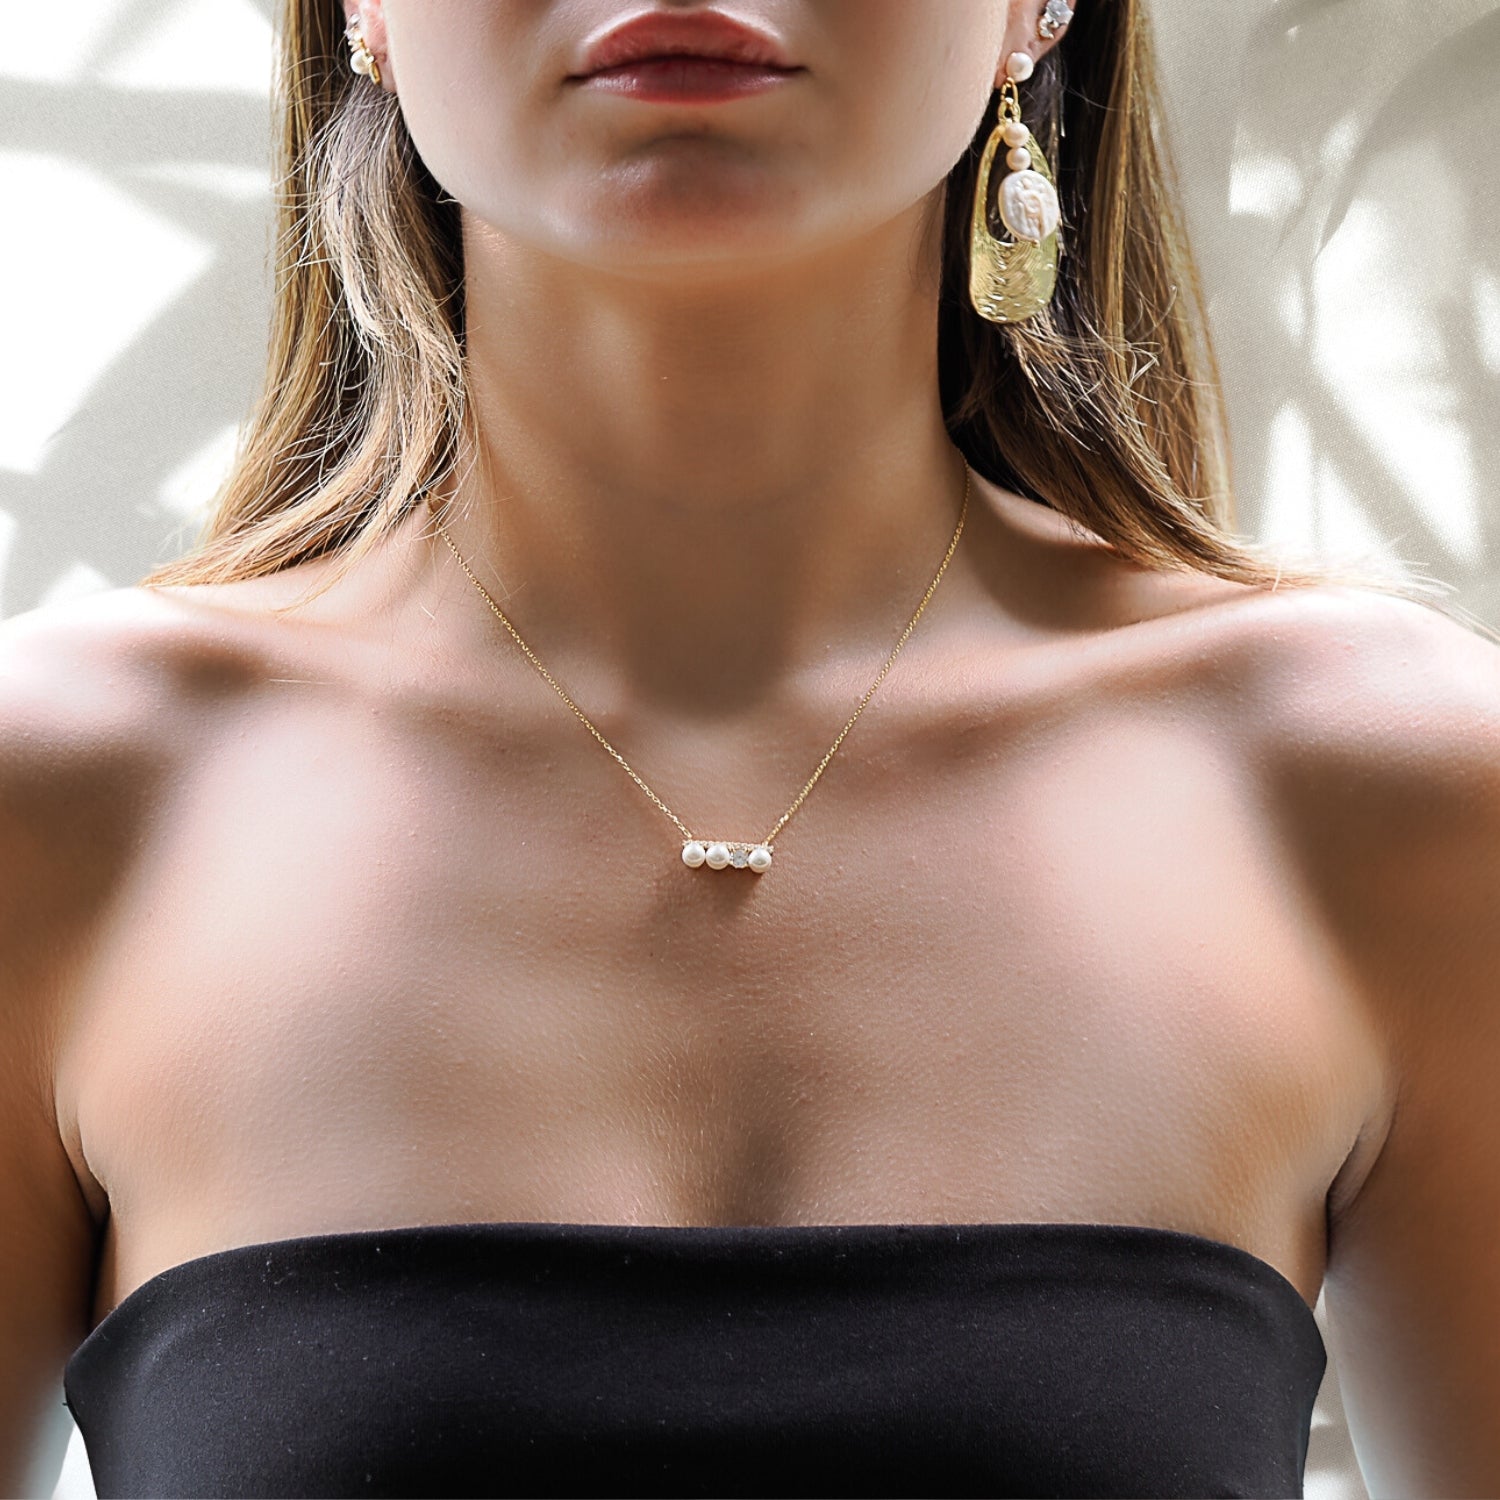 Model Wearing Pearl &amp; Diamond Gold Necklace - Timeless elegance on display.